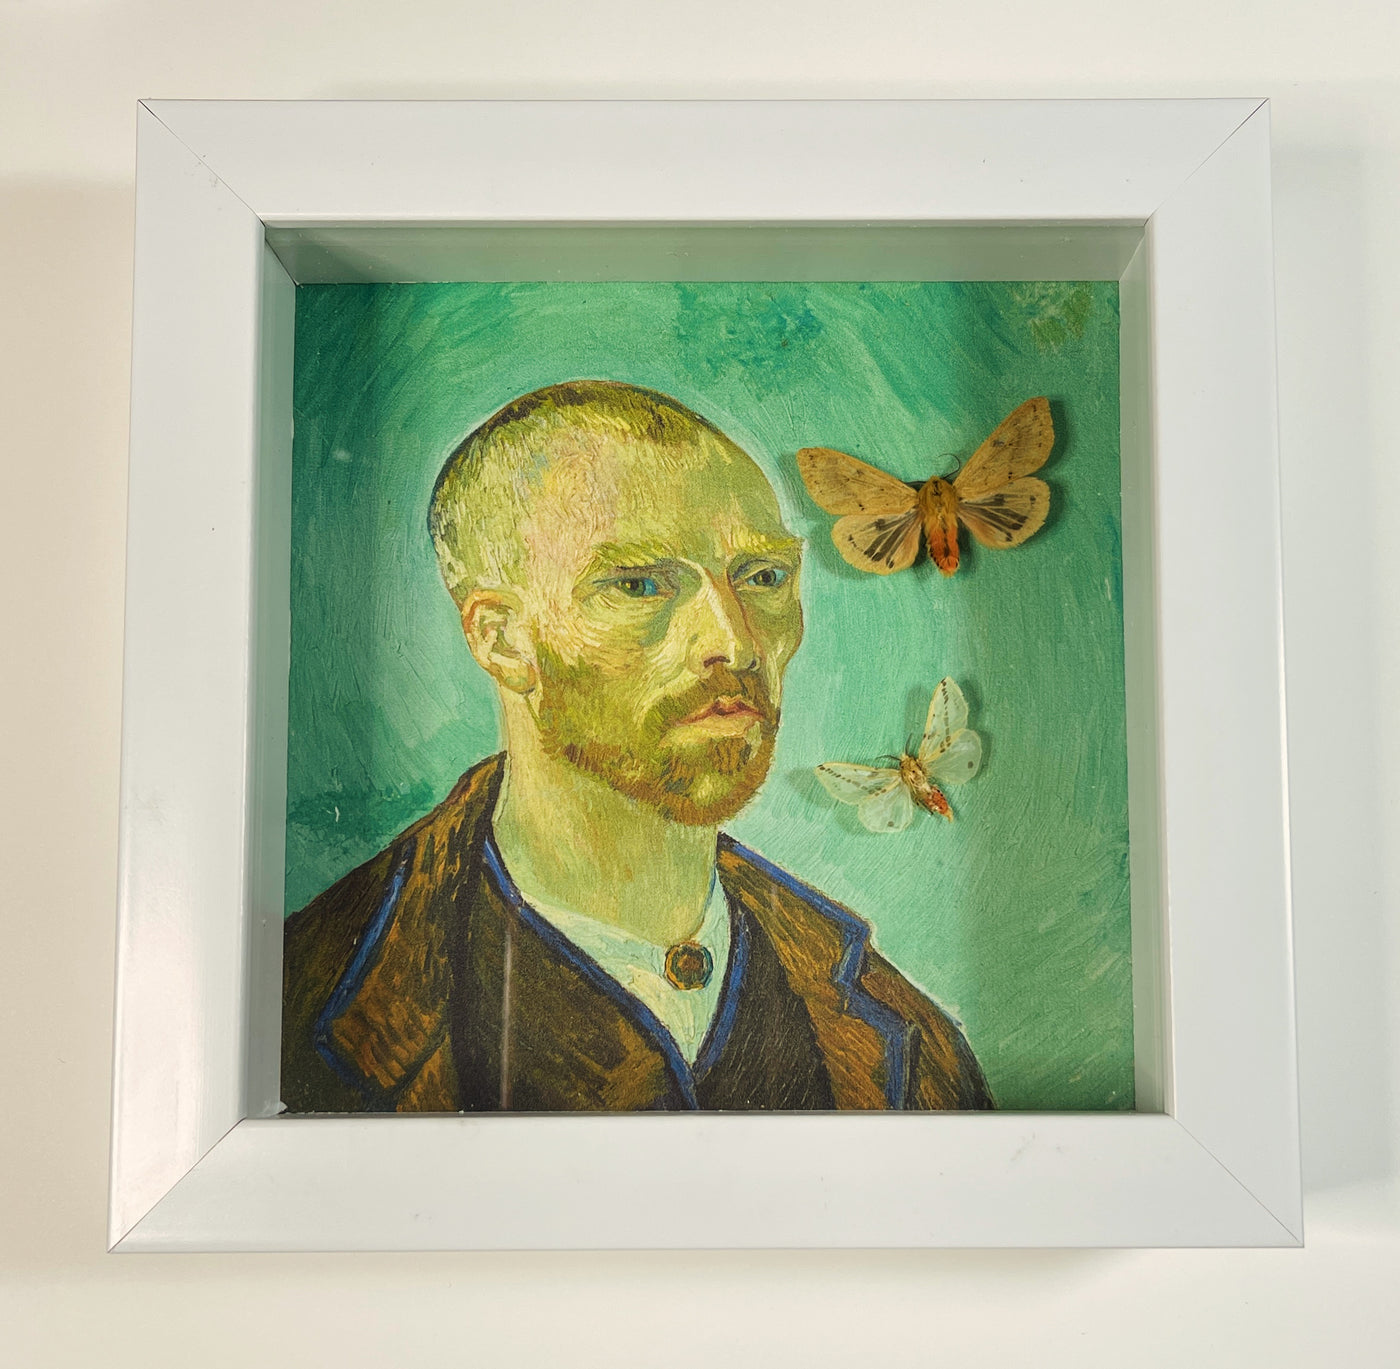 Vincent Van Gogh's "Self Portrait Dedicated to Paul Gauguin" with two real Tiger Moths